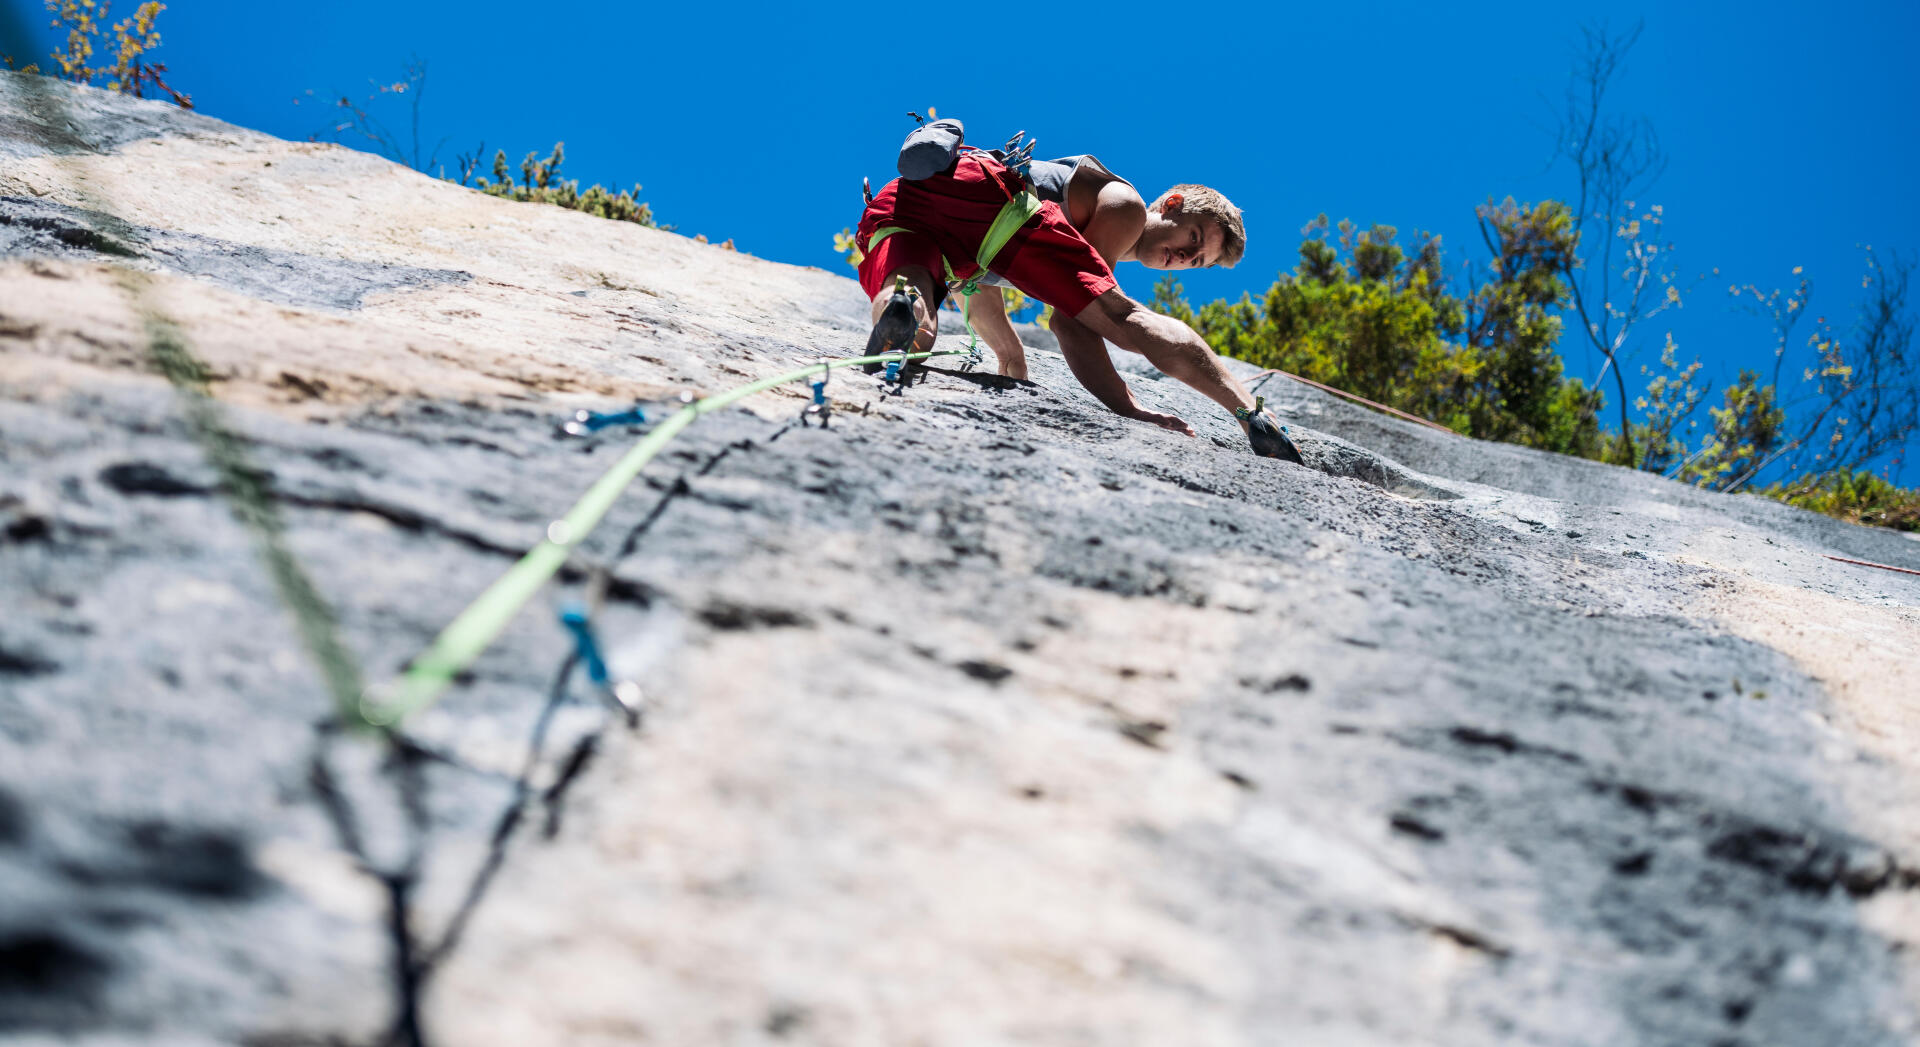 How to choose your climbing bag